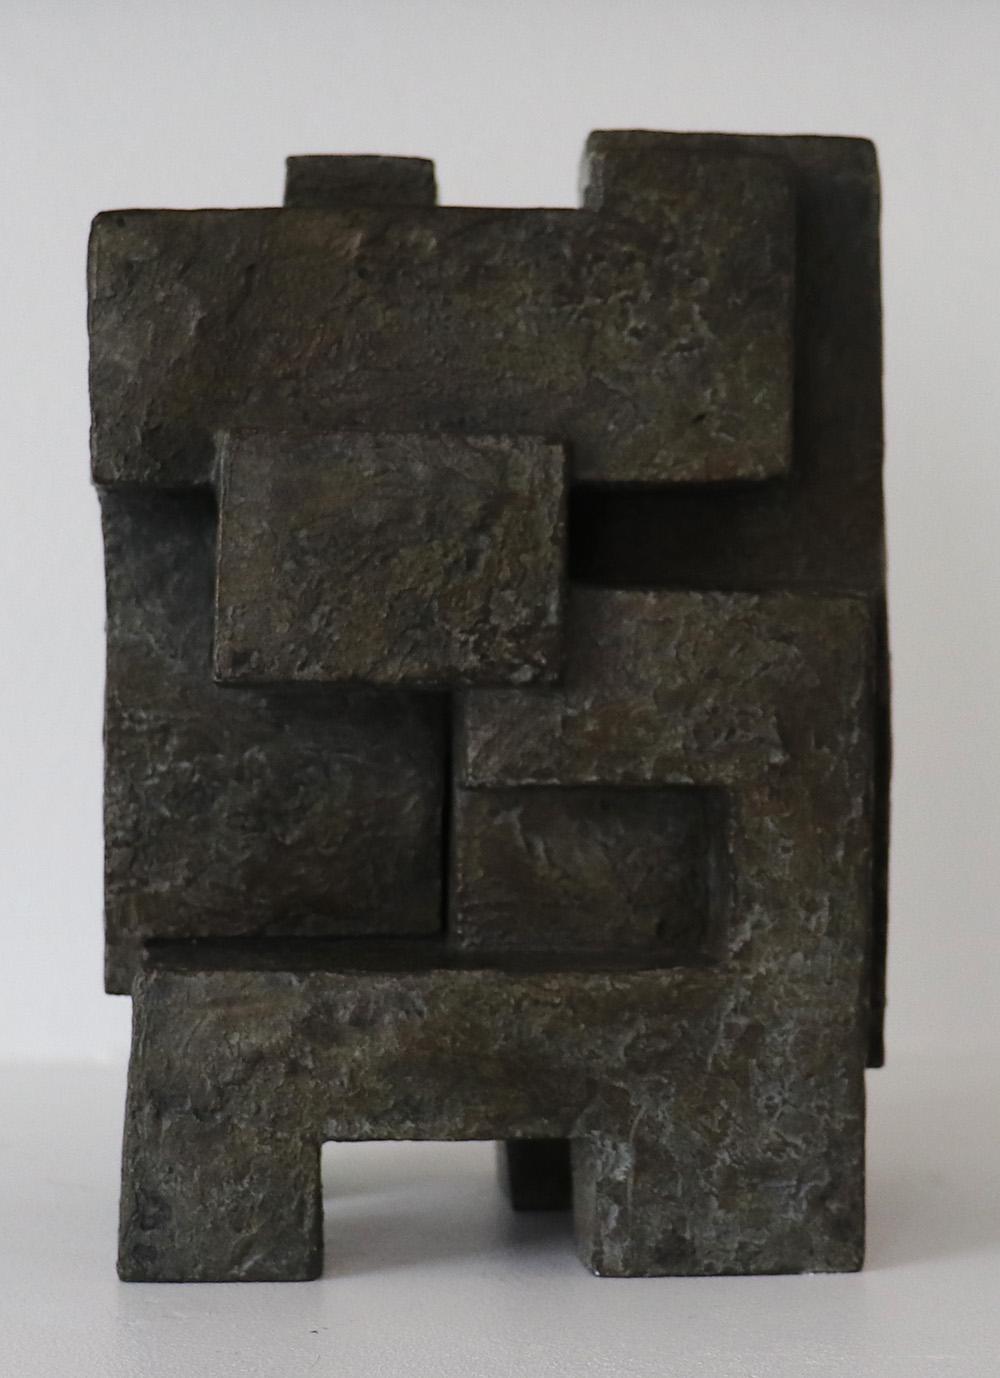 Block XI is a bronze sculpture by contemporary artist Delphine Brabant, dimensions are 19.5 × 11 × 13.5 cm (7.7 × 4.3 × 5.3 in). The sculpture is signed and numbered, it is part of a limited edition of 8 editions + 4 artist’s proofs, and comes with